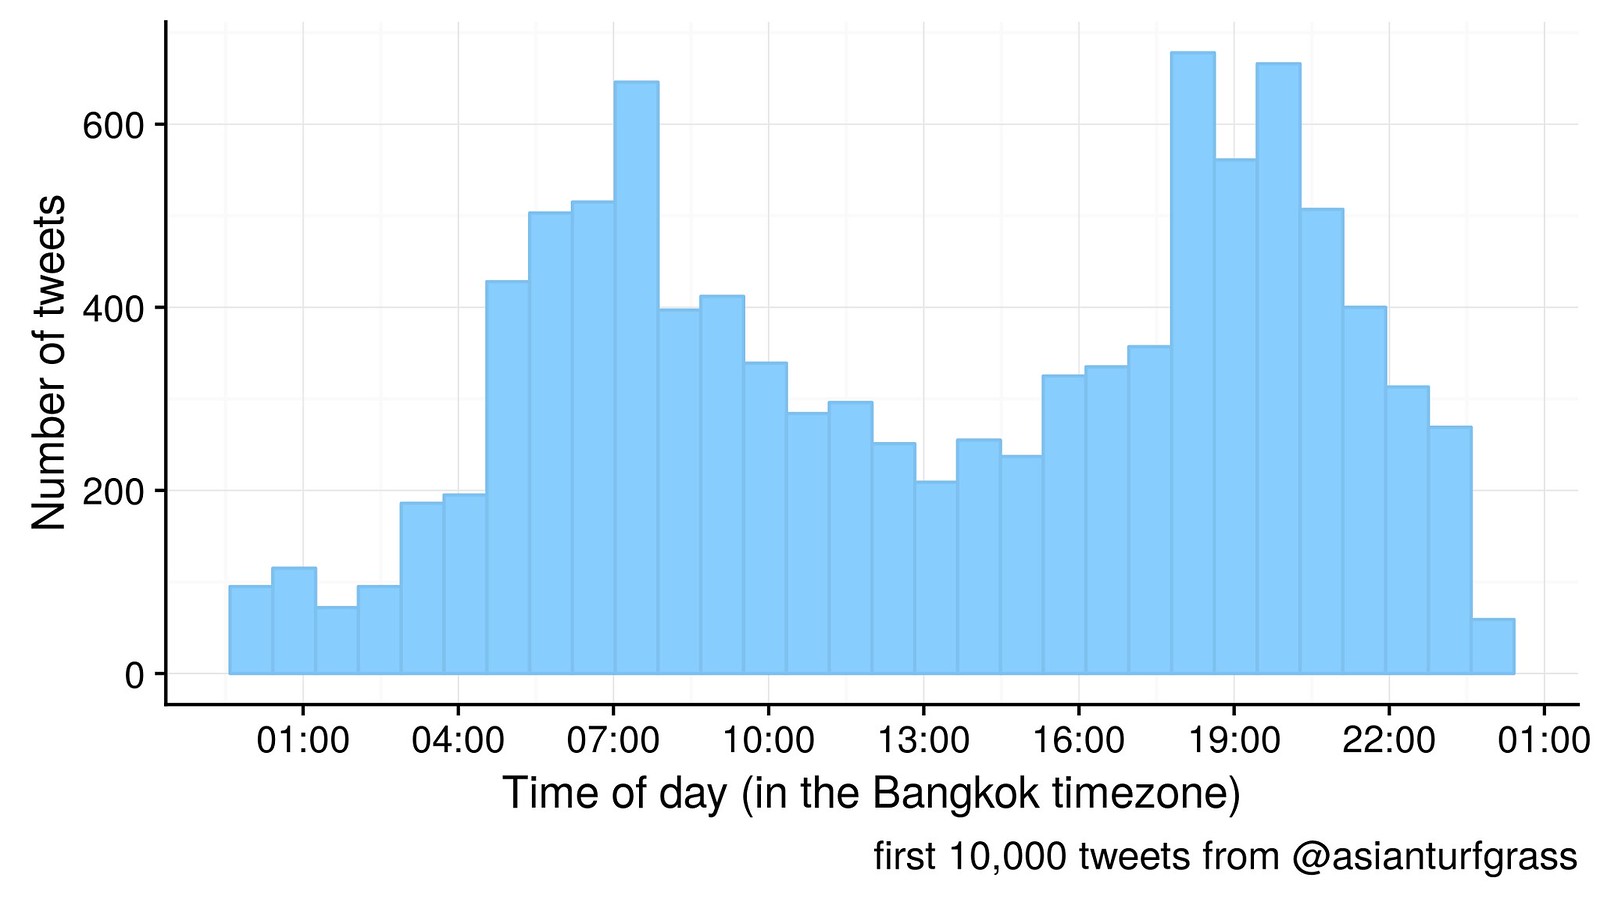 tweets by time of day